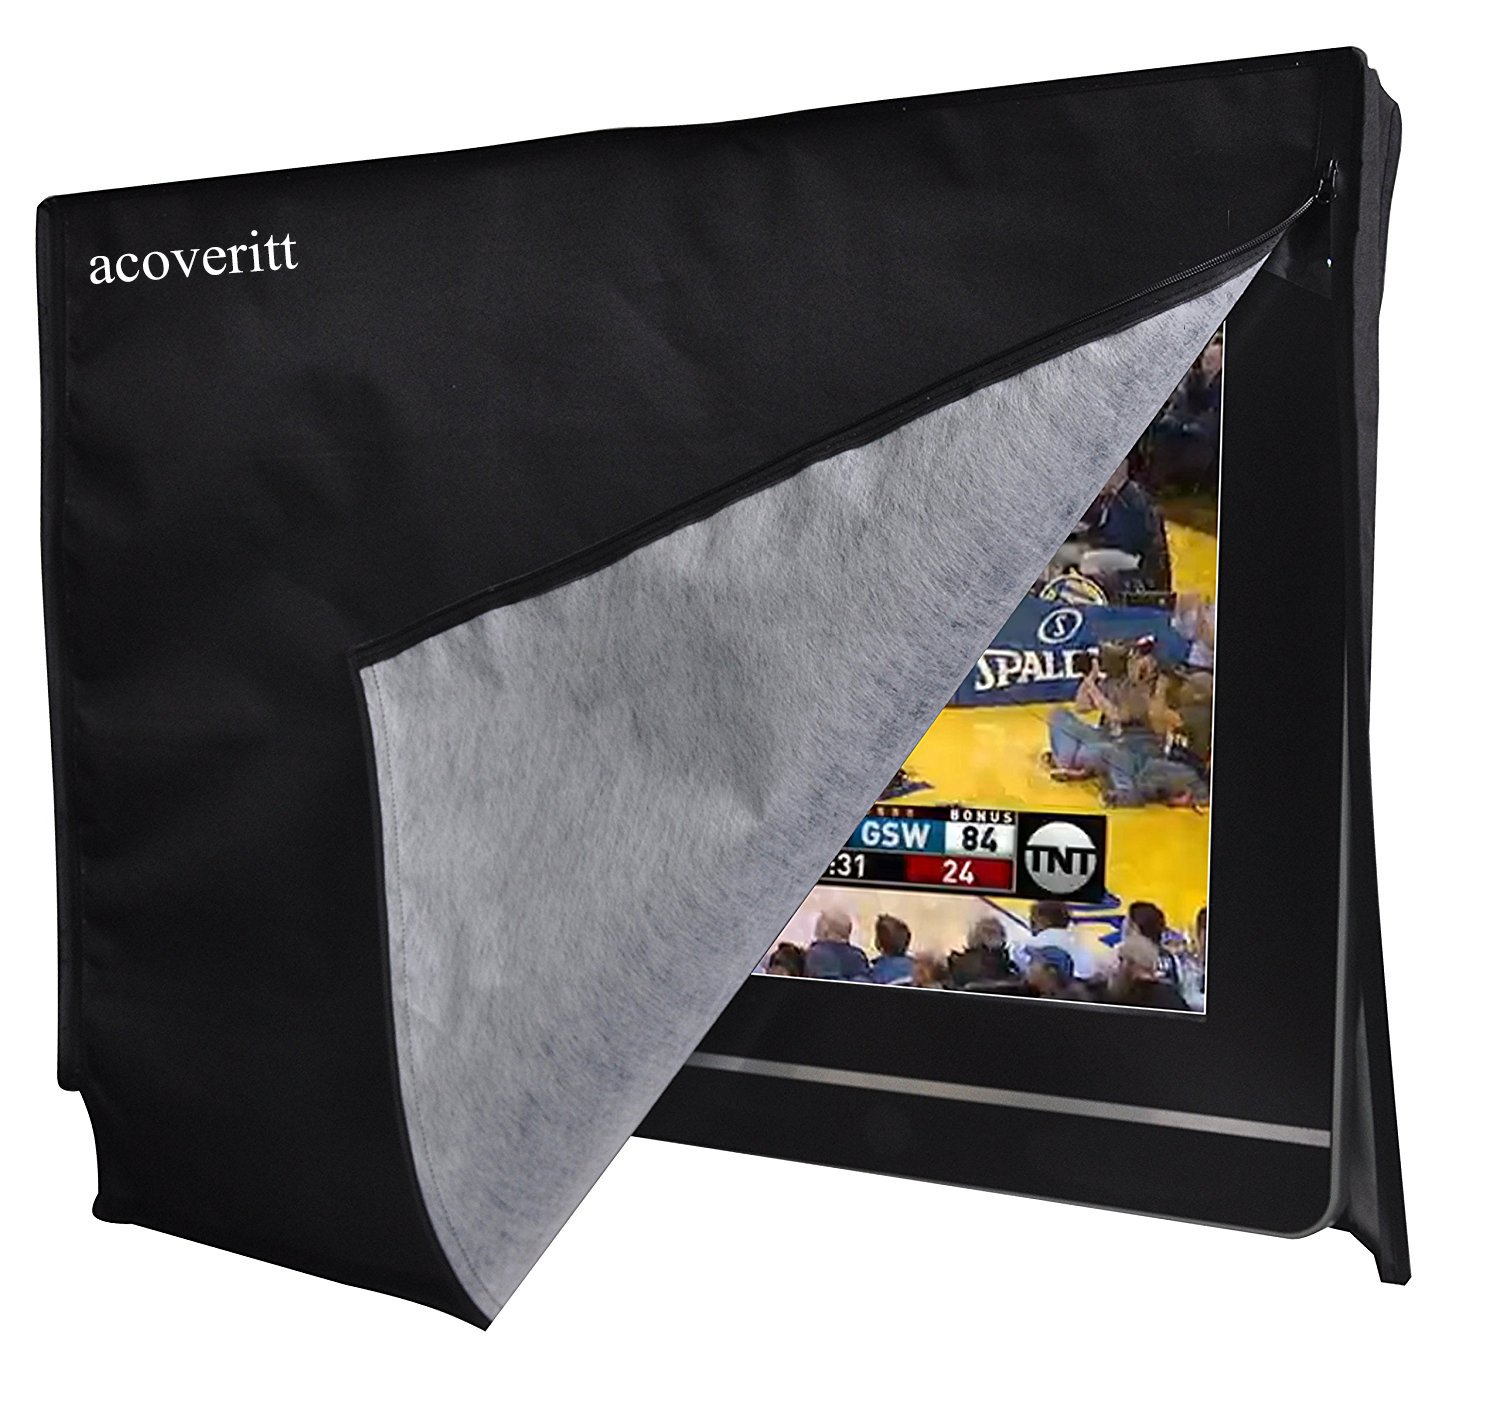 acoveritt Outdoor 50" TV Set Cover,Scratch Resistant Liner Protect LED Screen Best-Compatible with Standard Mounts and Stands (B